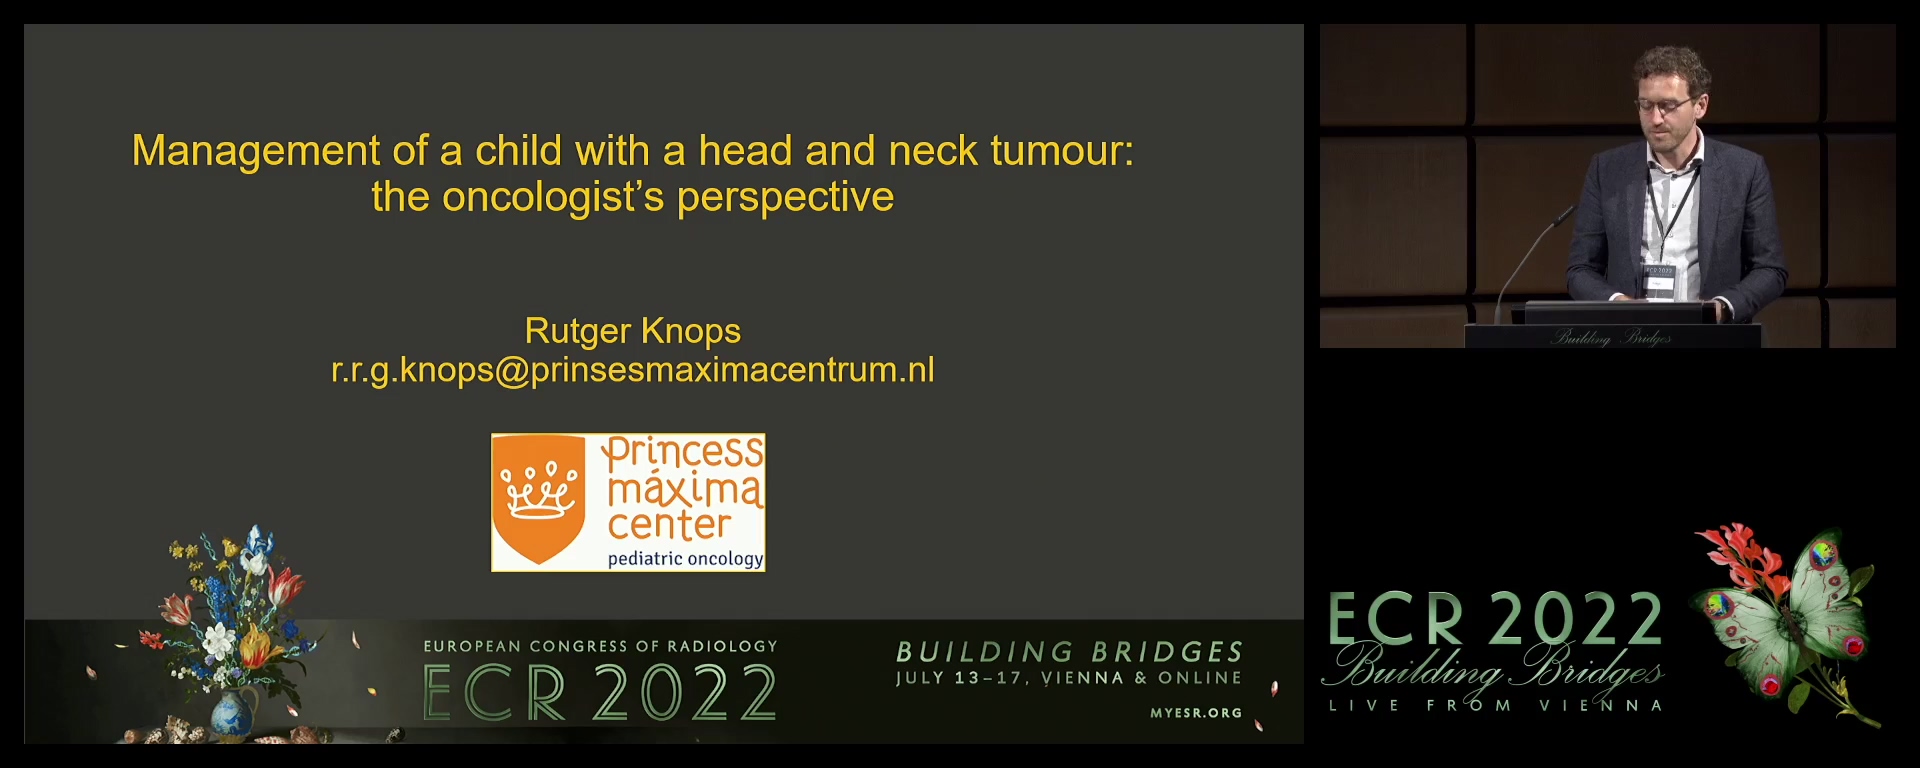 Management of a child with a head and neck tumour: the oncologist's perspective - Rutger Knops, Utrecht / NL